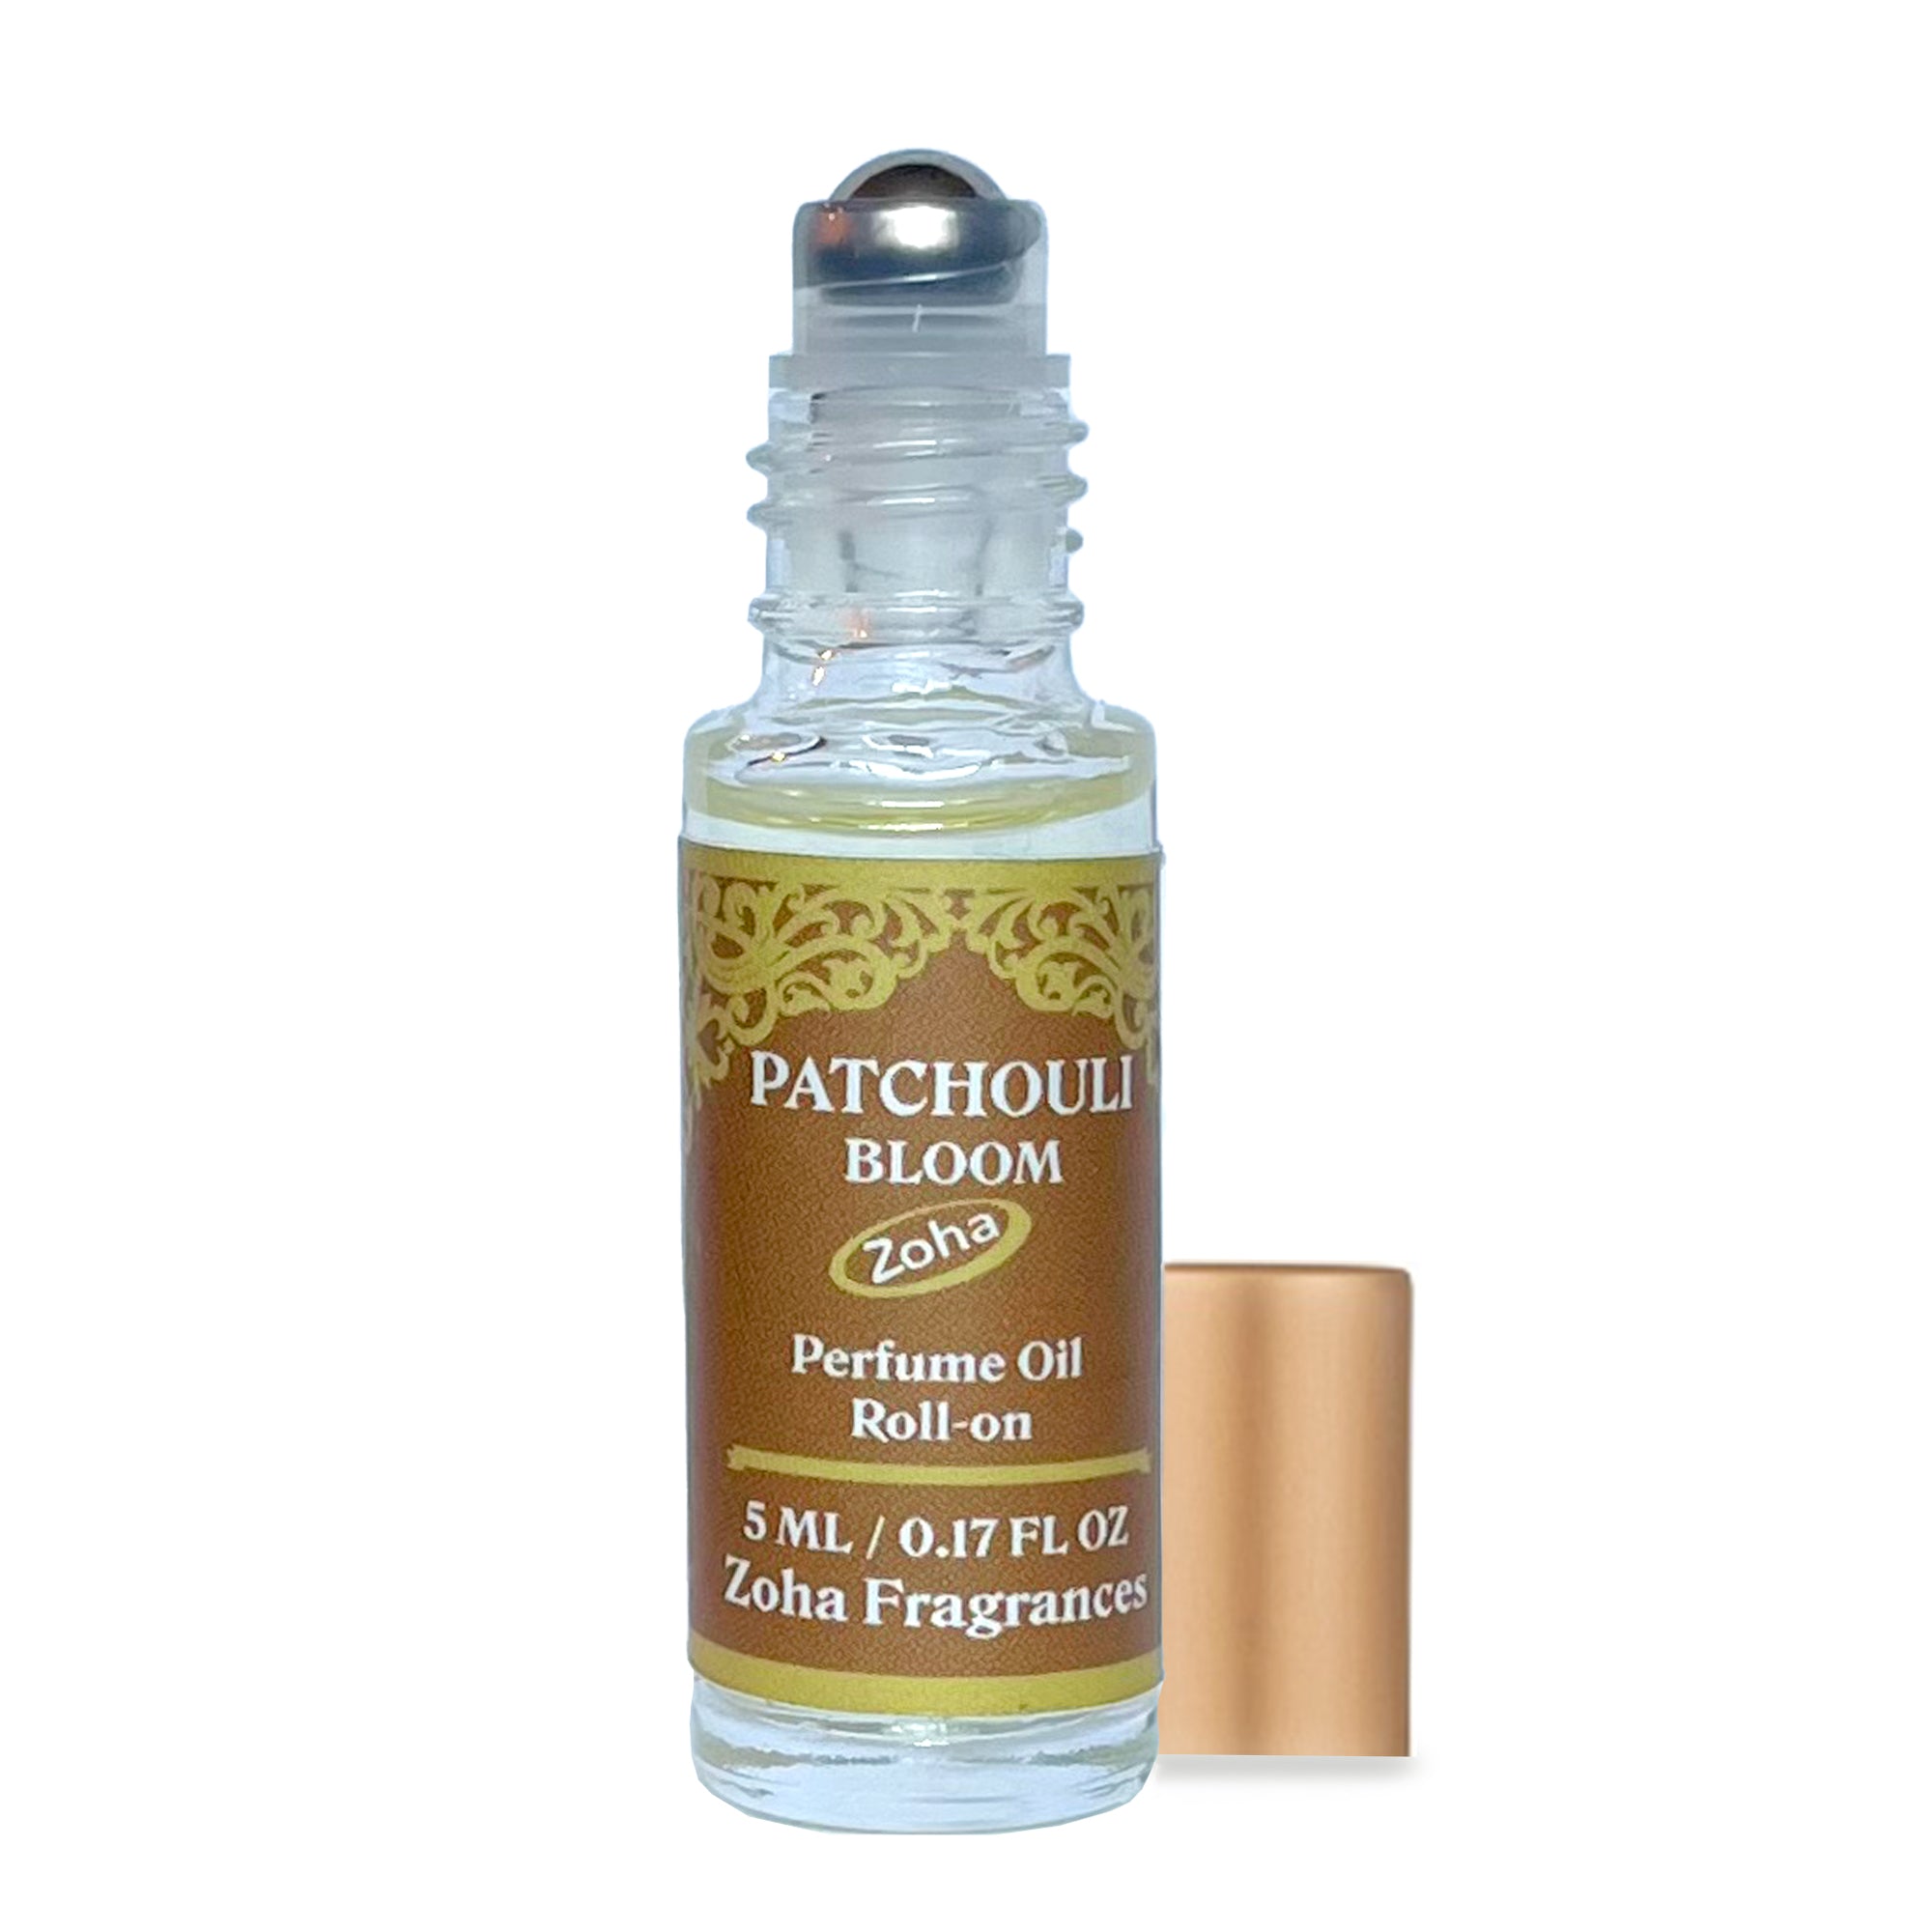 Patchouli Bloom Roll On Perfume for Women and Men